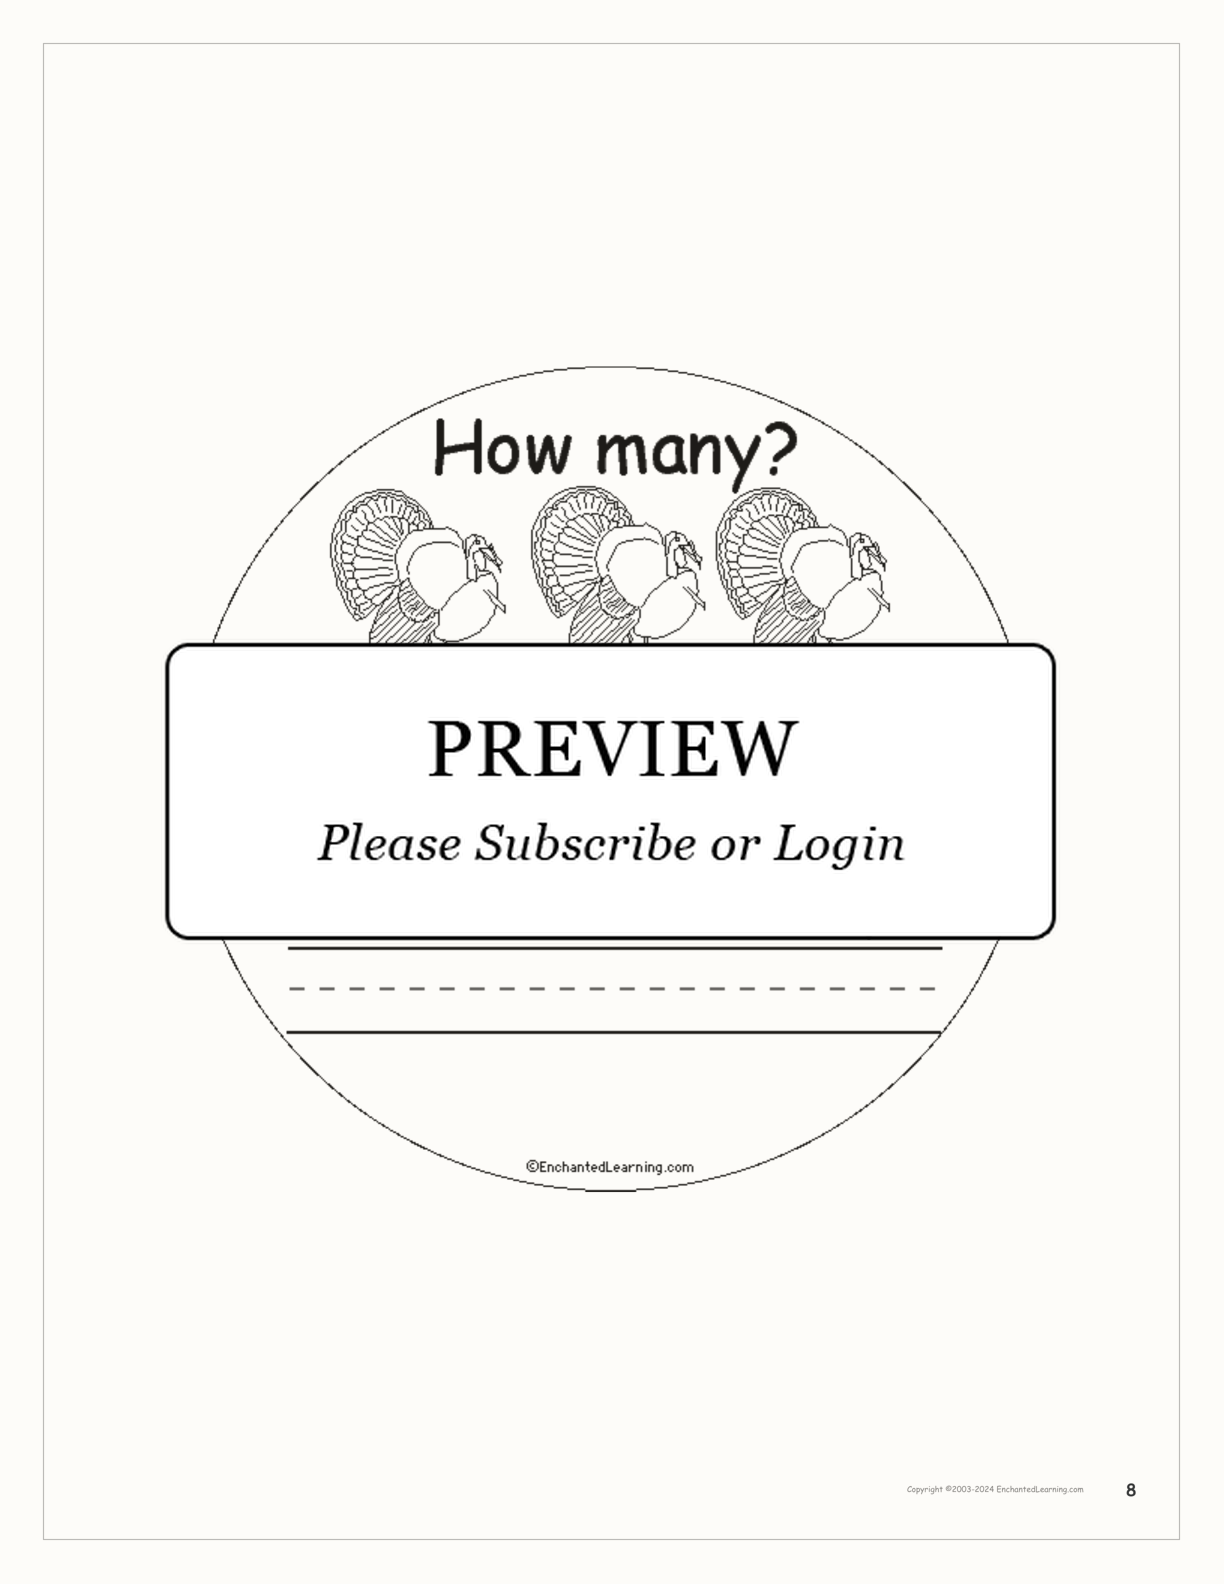 How Many Turkeys? interactive printout page 8